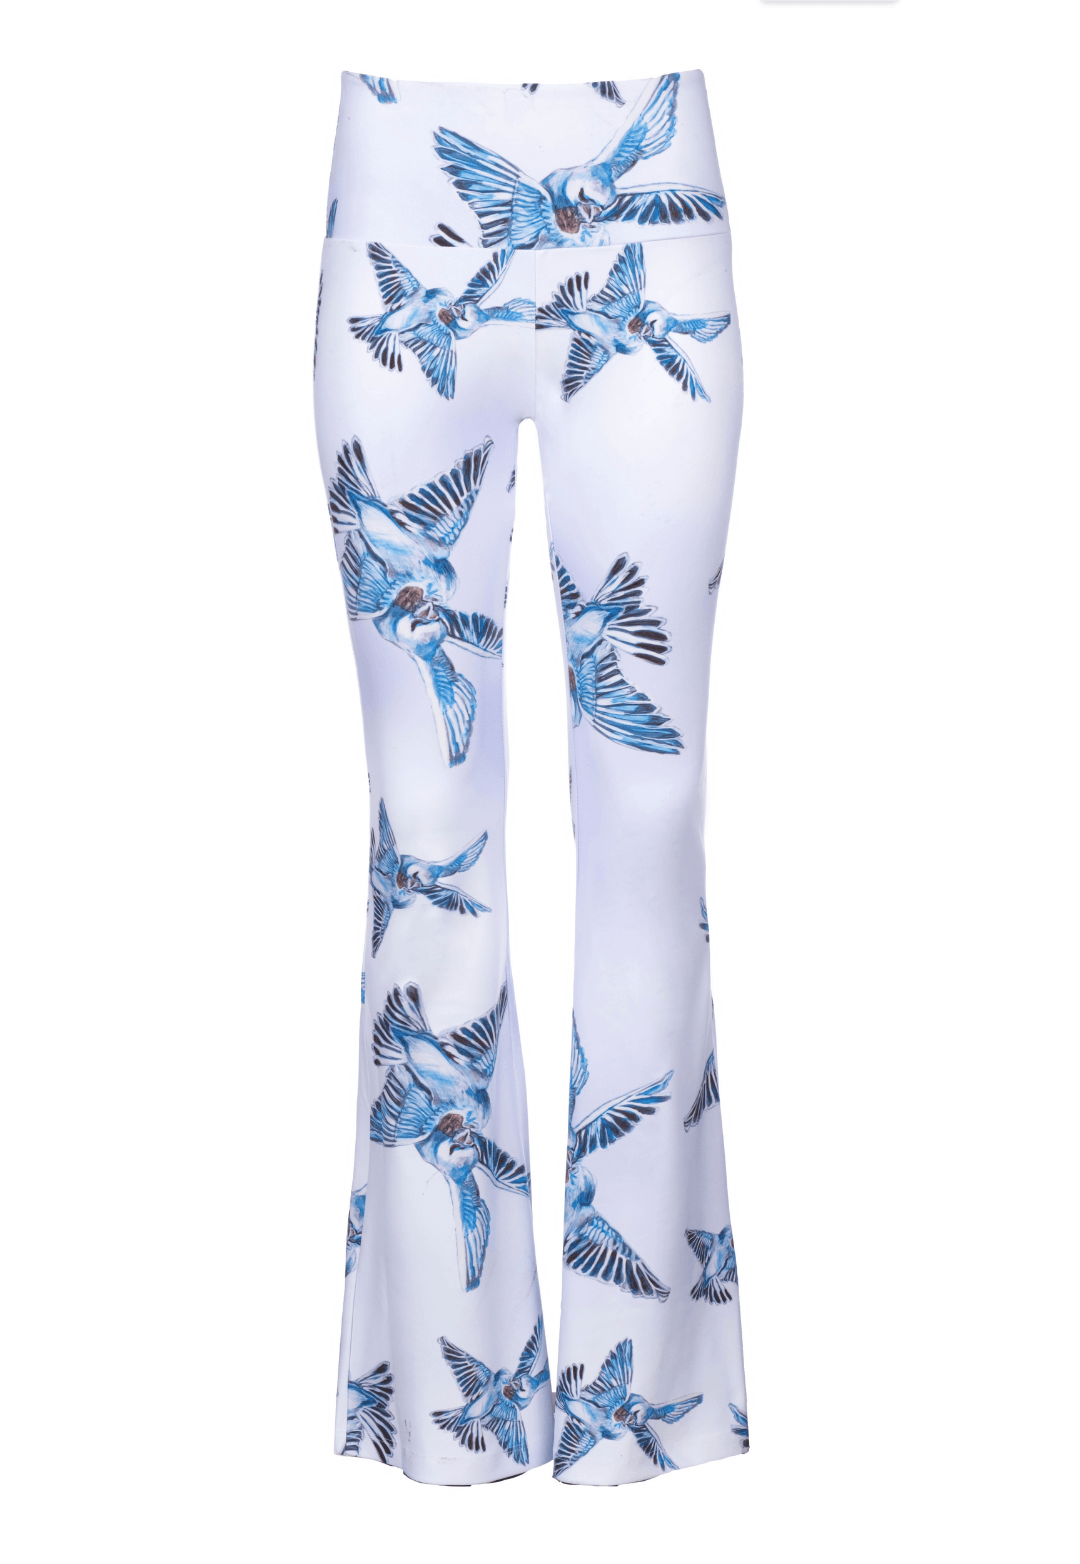 stretch knit lavender pants with blue birds printed on it by Ala von Auersperg